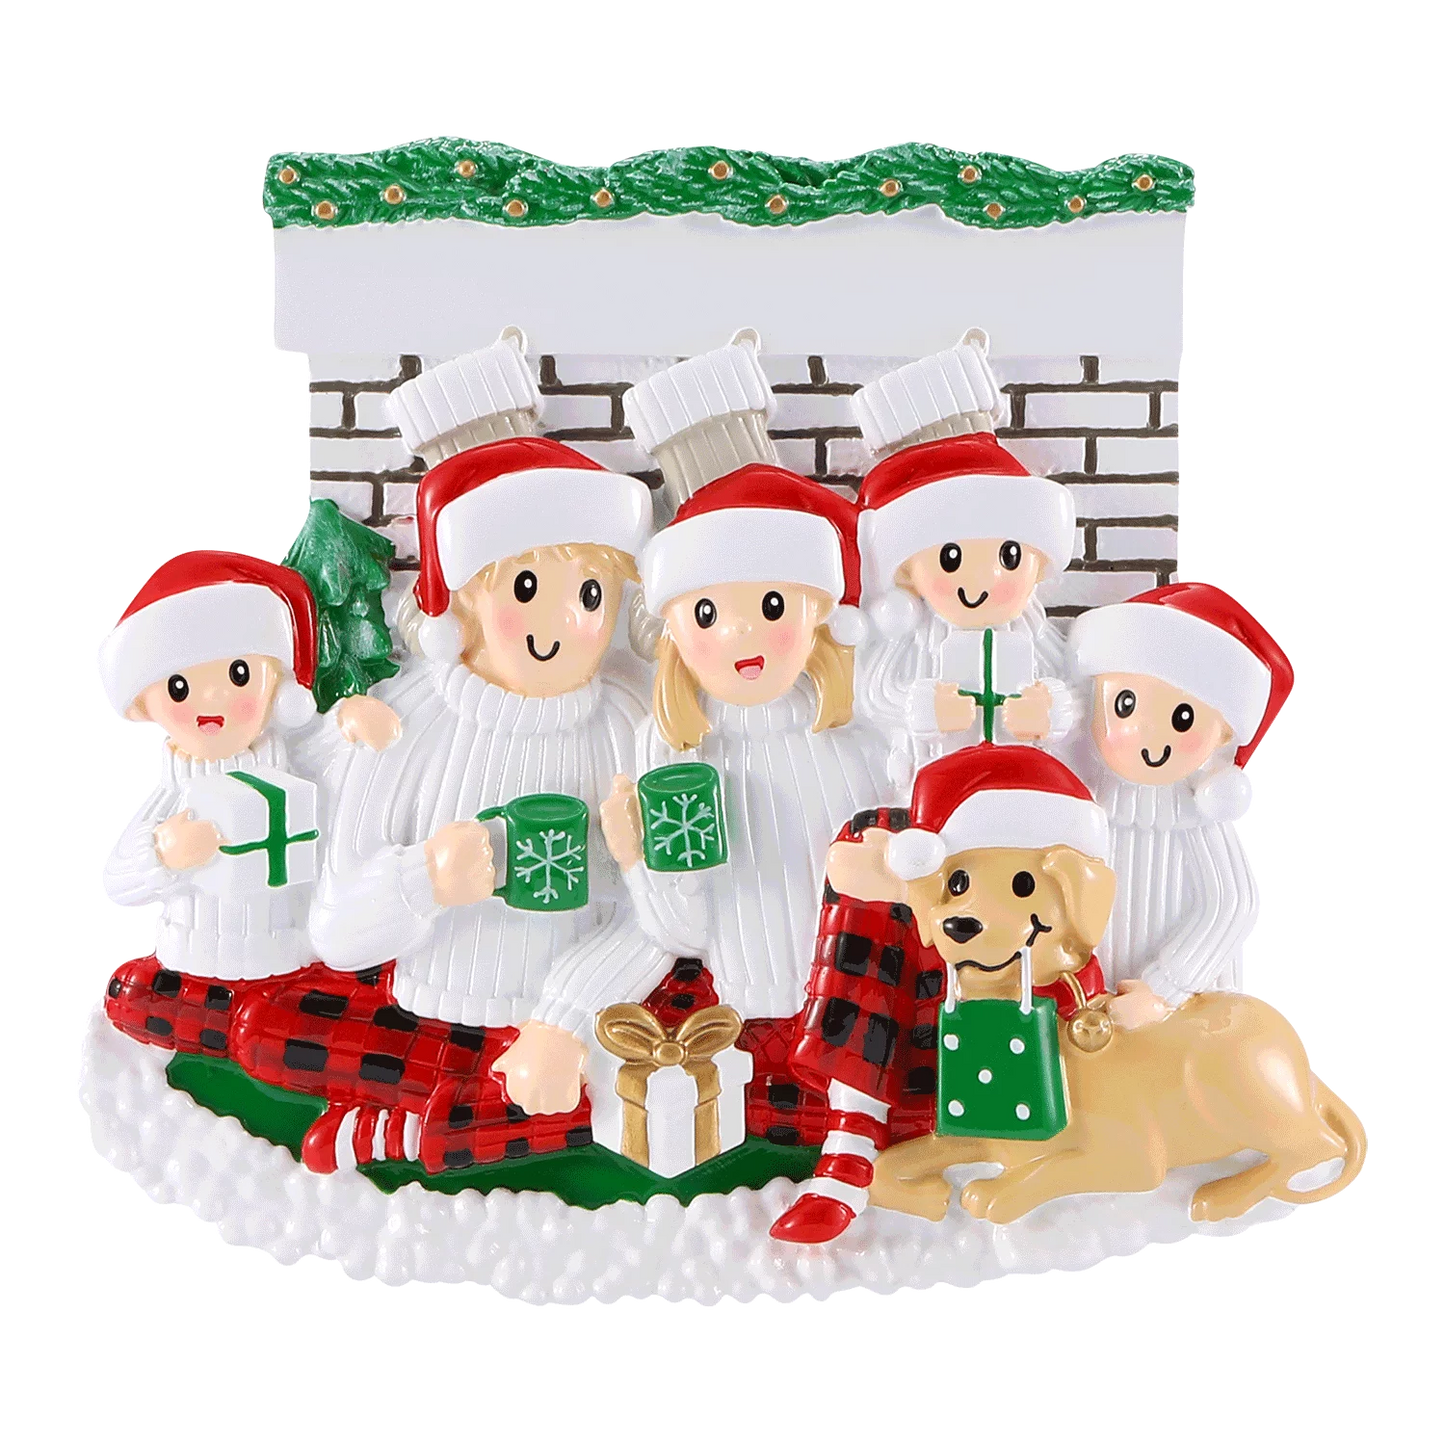 Fireplace Family of 5 Ornament